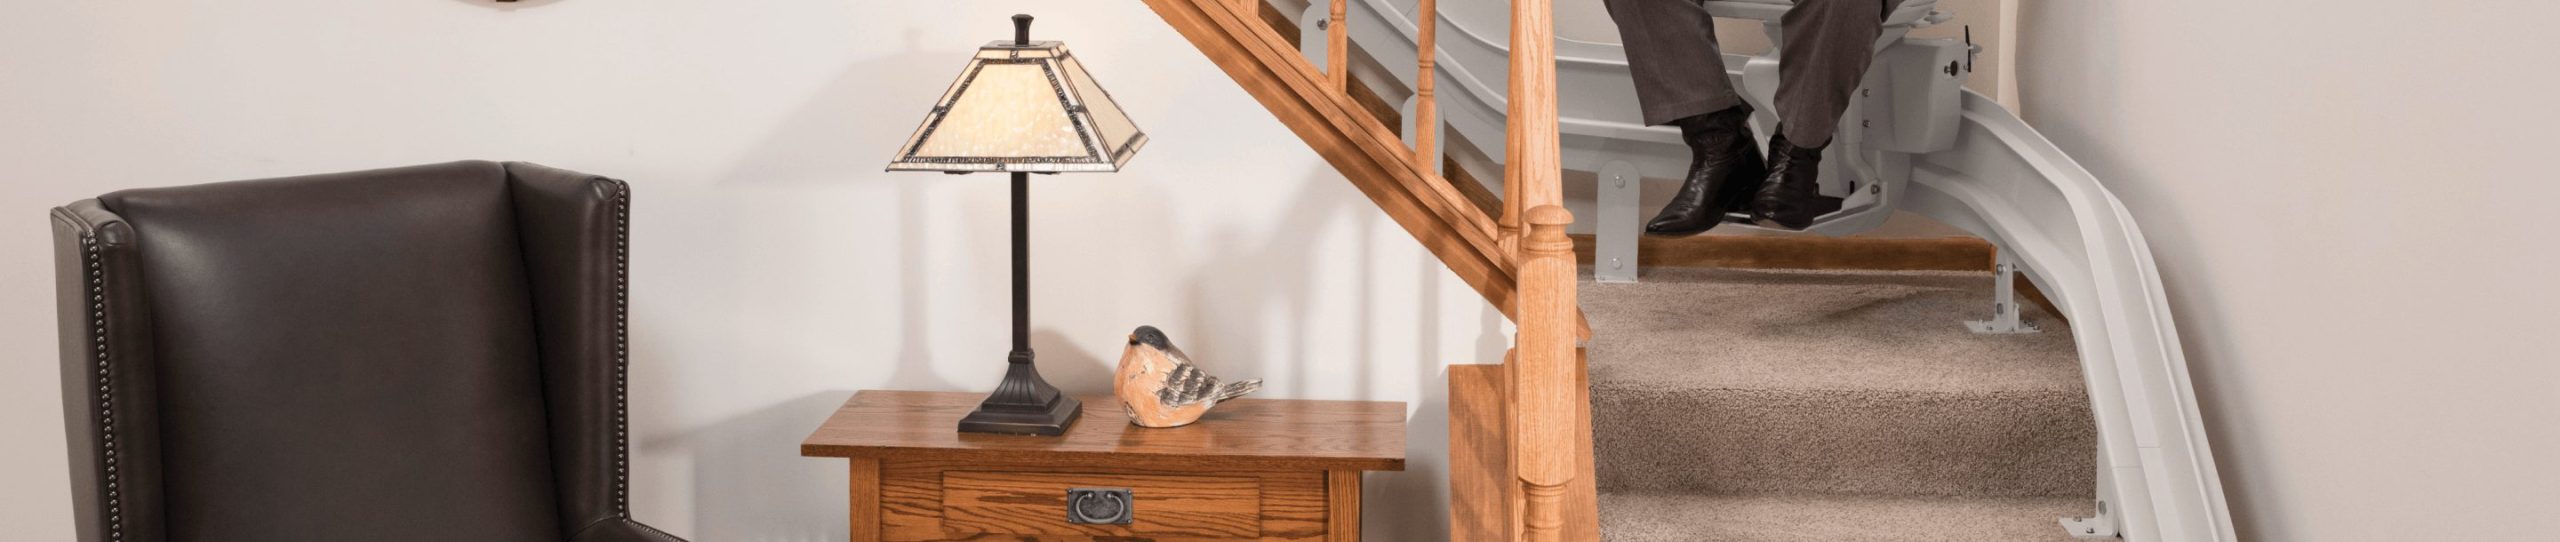 Lompoc Stair Lift Pricing Tool